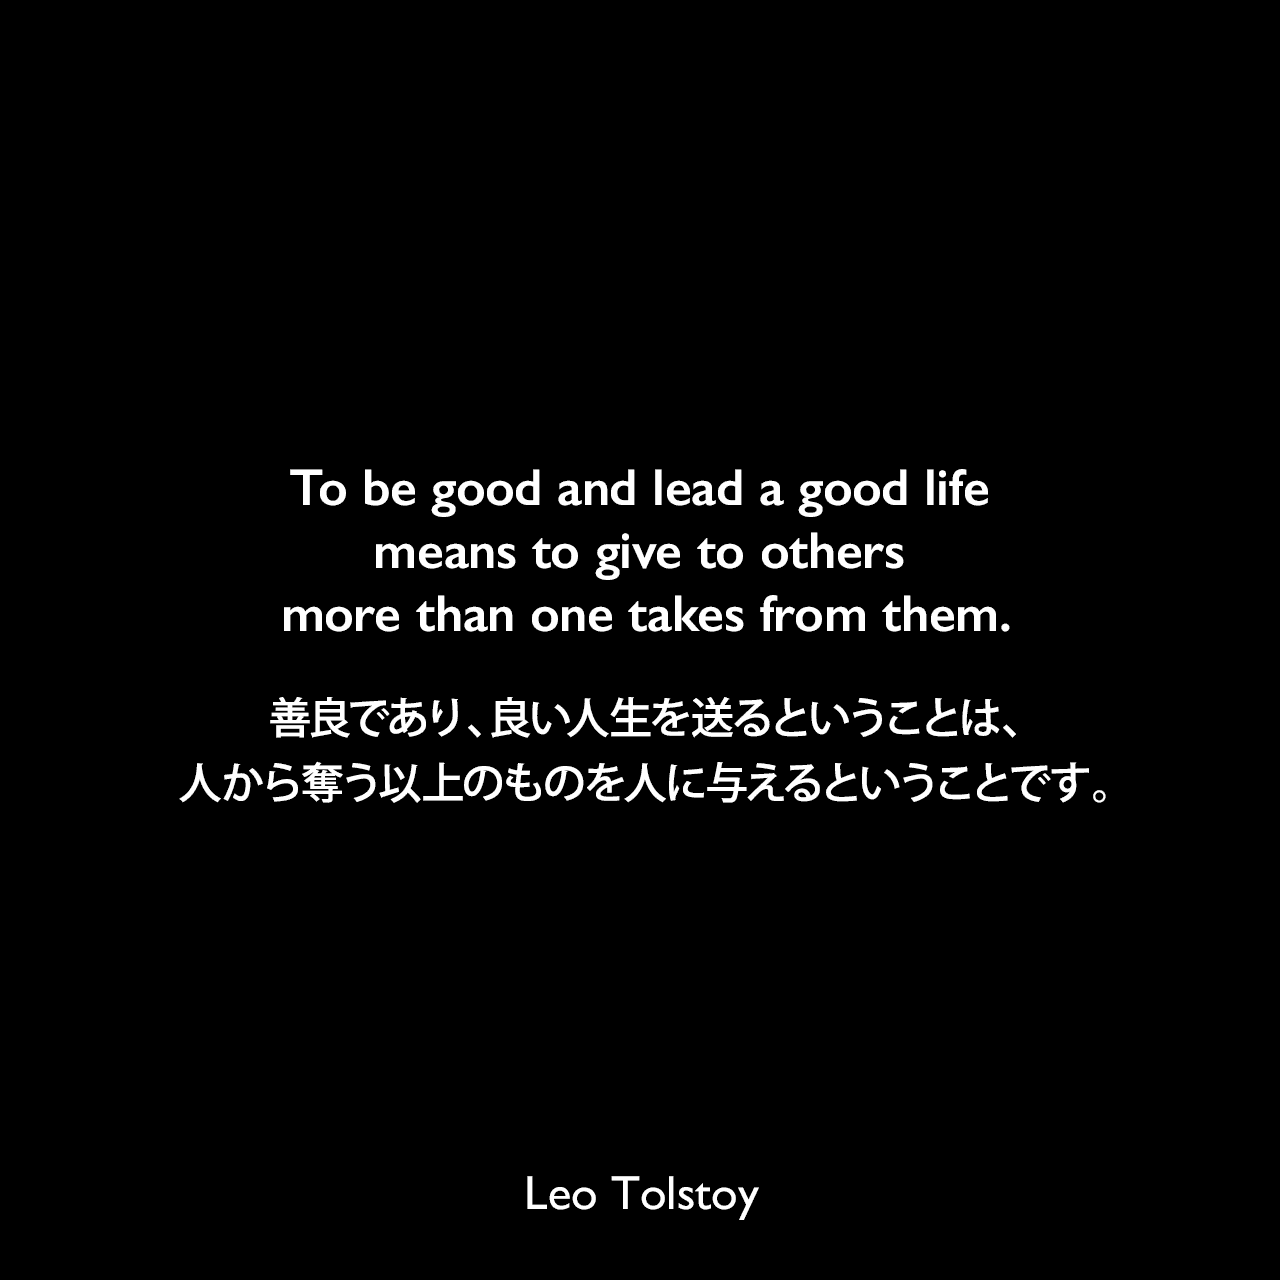 To be good and lead a good life means to give to others more than one takes from them.善良であり、良い人生を送るということは、人から奪う以上のものを人に与えるということです。- トルストイによる本「The First Step」よりLeo Tolstoy